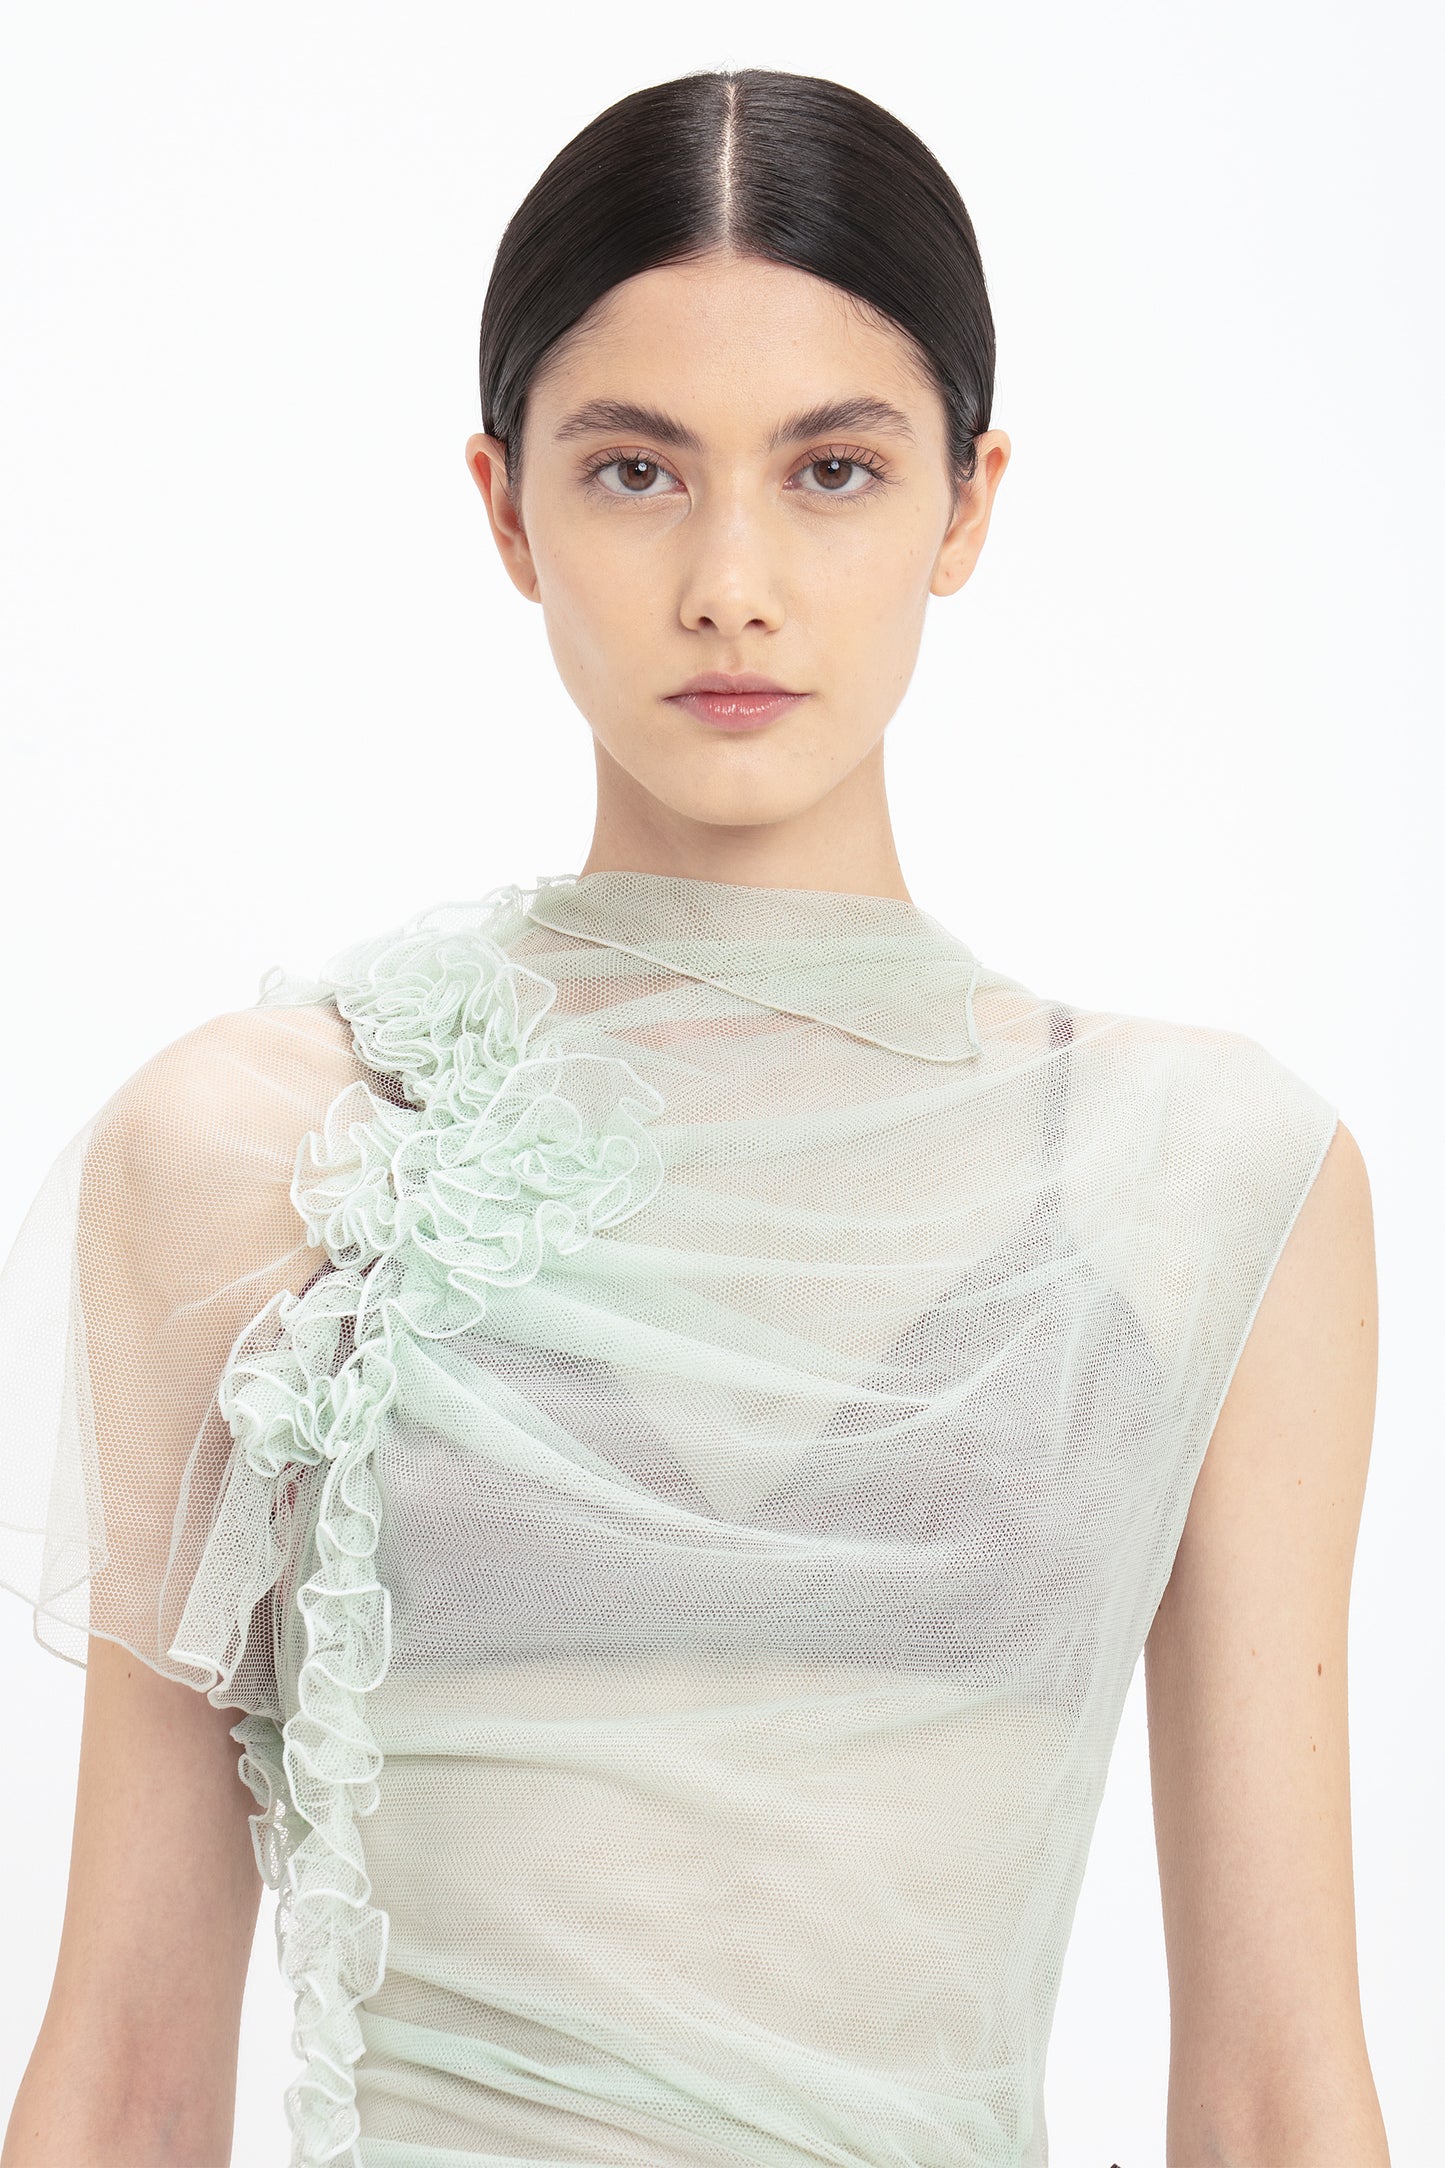 Person with dark hair styled in a center part wearing a Gathered Tulle Detail Floor-Length Dress In Jade by Victoria Beckham, looking directly at the camera.